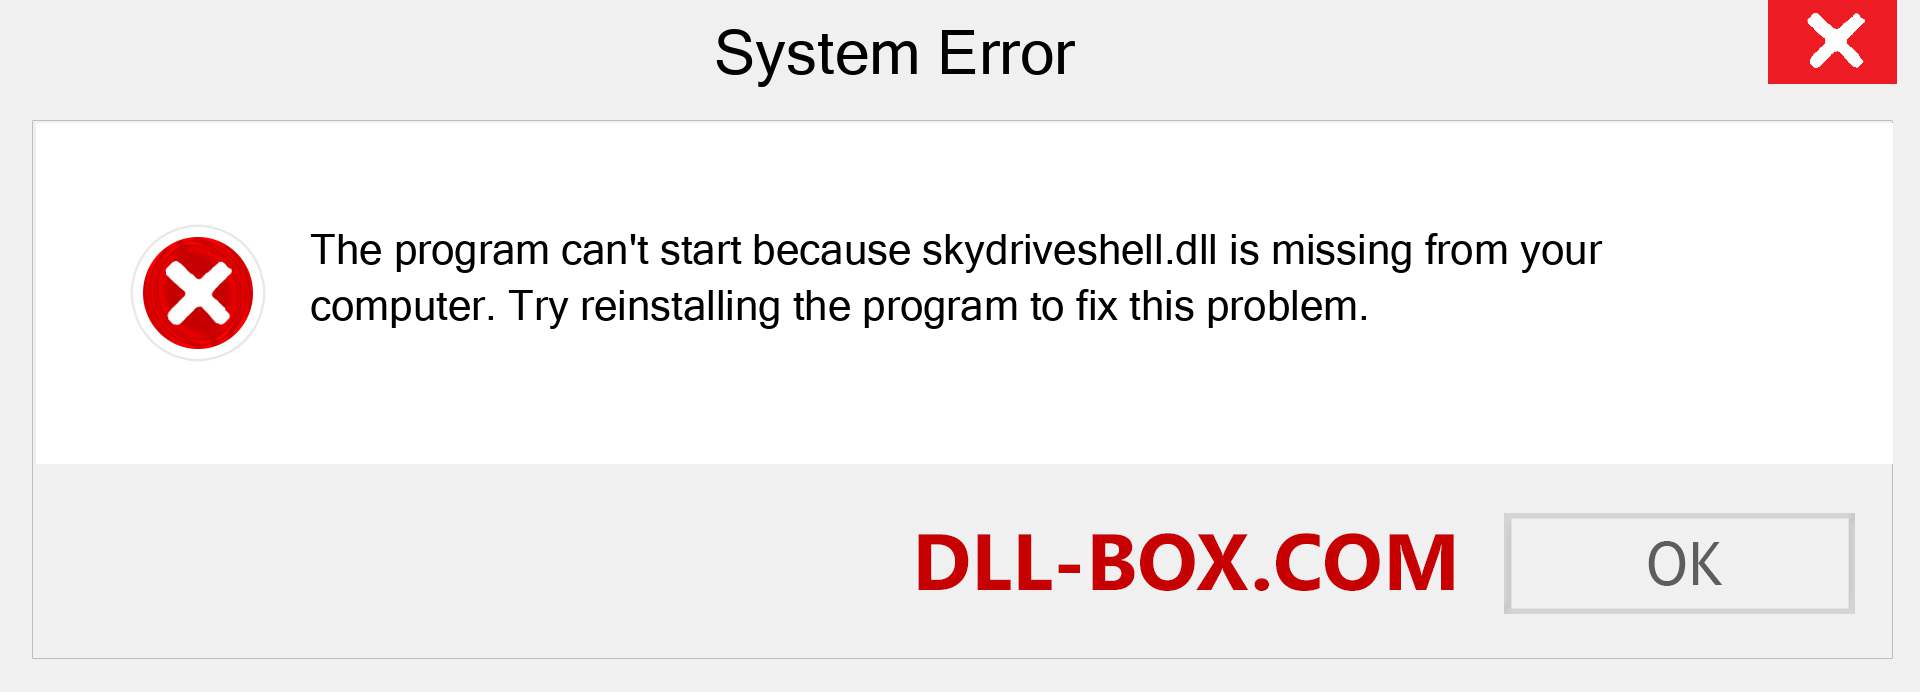  skydriveshell.dll file is missing?. Download for Windows 7, 8, 10 - Fix  skydriveshell dll Missing Error on Windows, photos, images